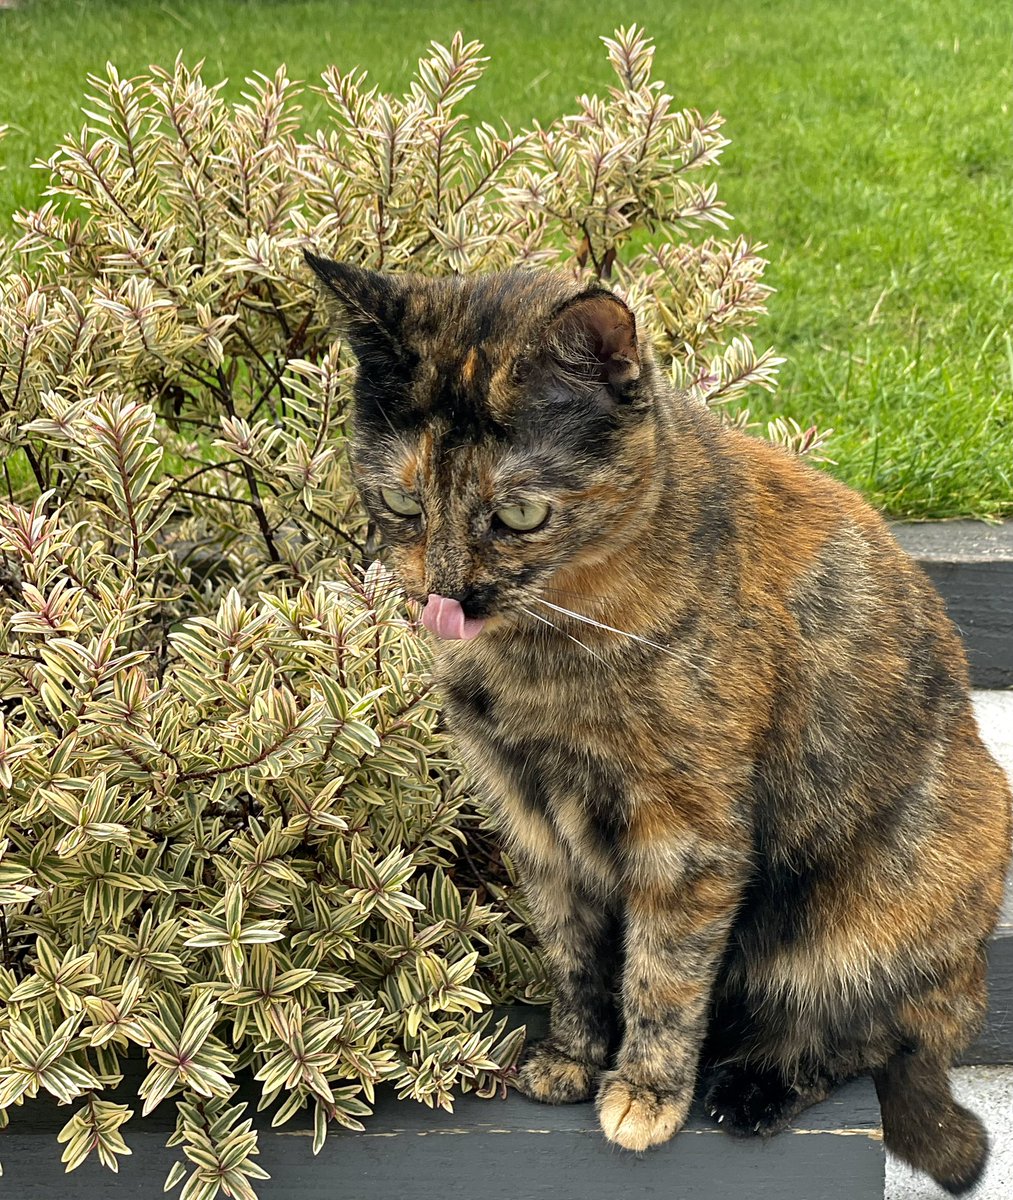 Happy #TongueOutTuesday frens! 😸Hope everyone has a fabulous day. 😽 #Cats #CatContent #CatsOfX #CatsOfTwitter #CatsOfInstagram #AdoptDontShop